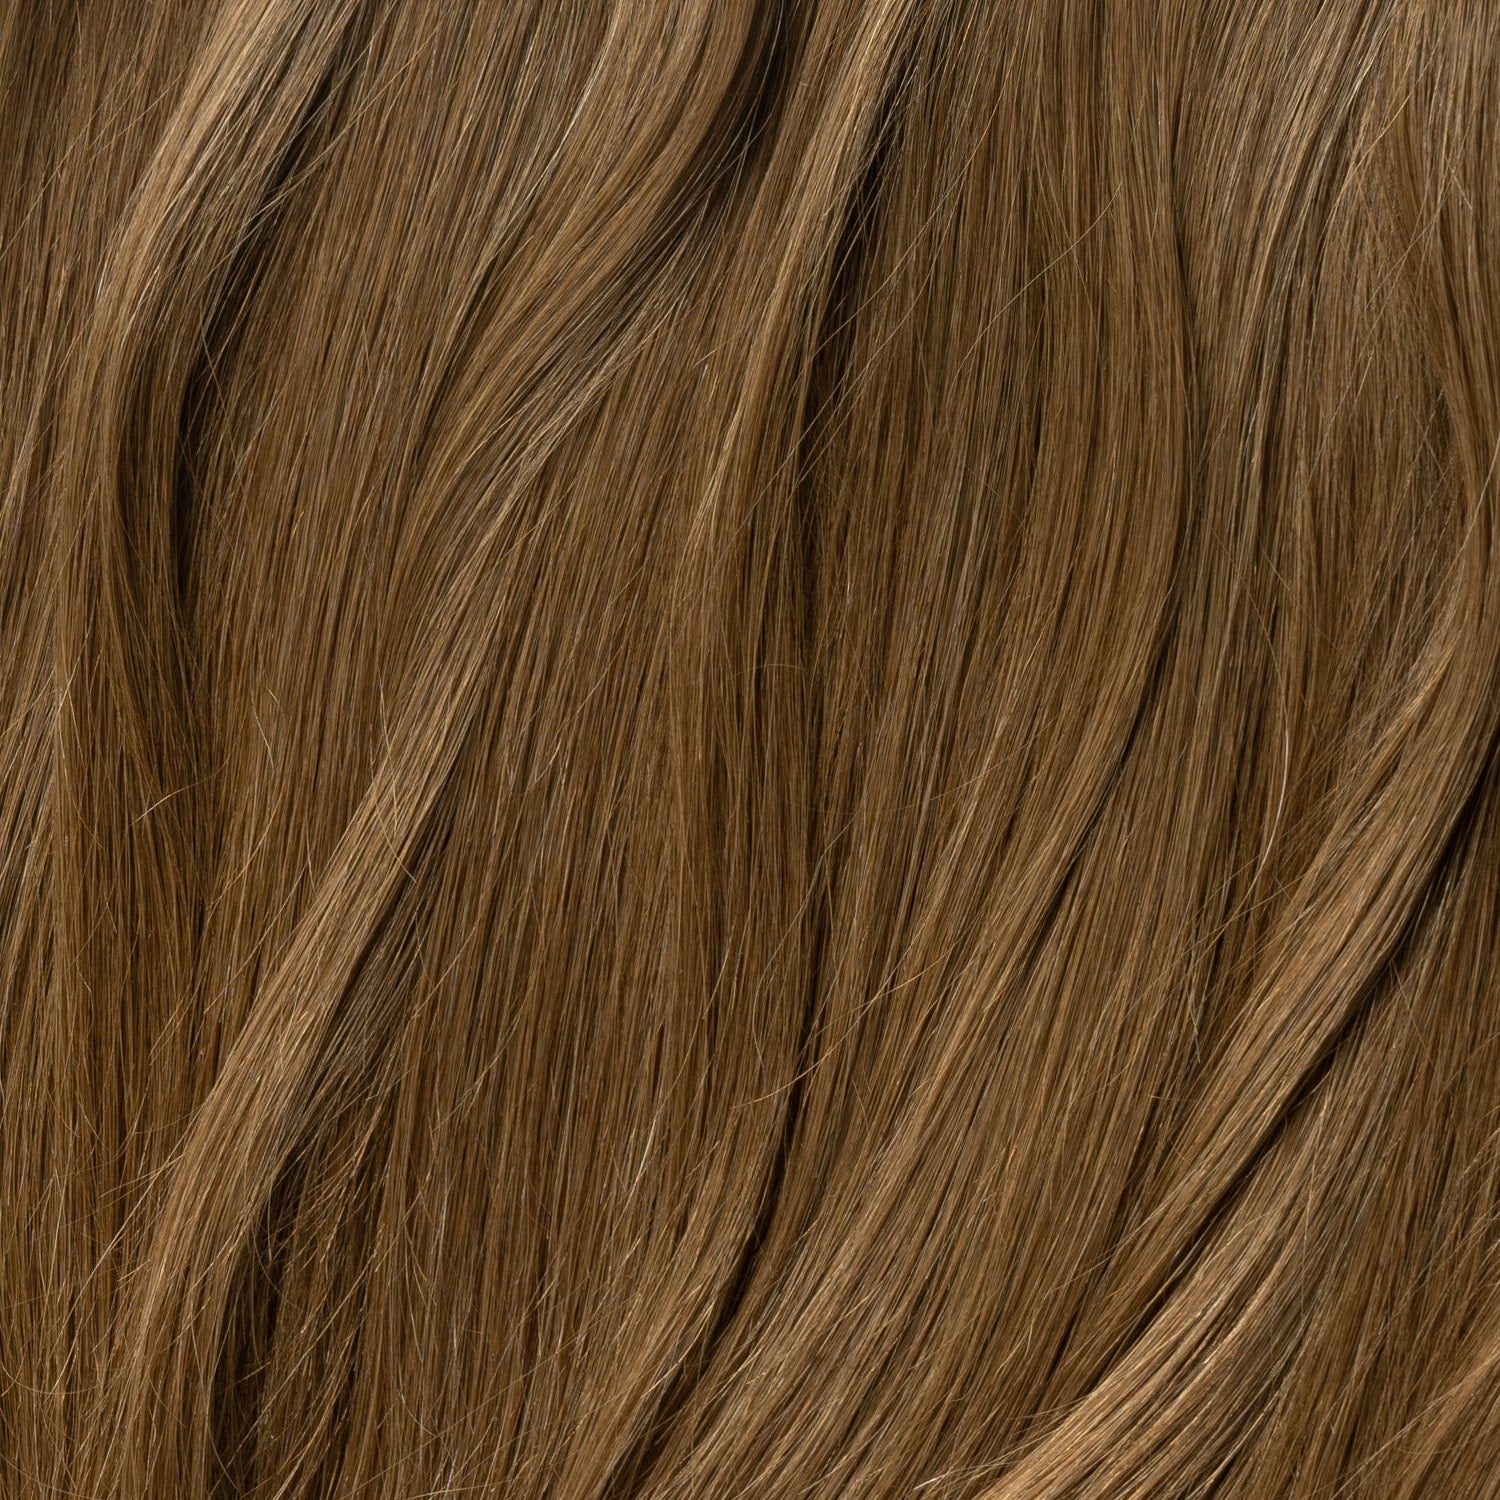 Tape in Extensions - Natural Brown 3